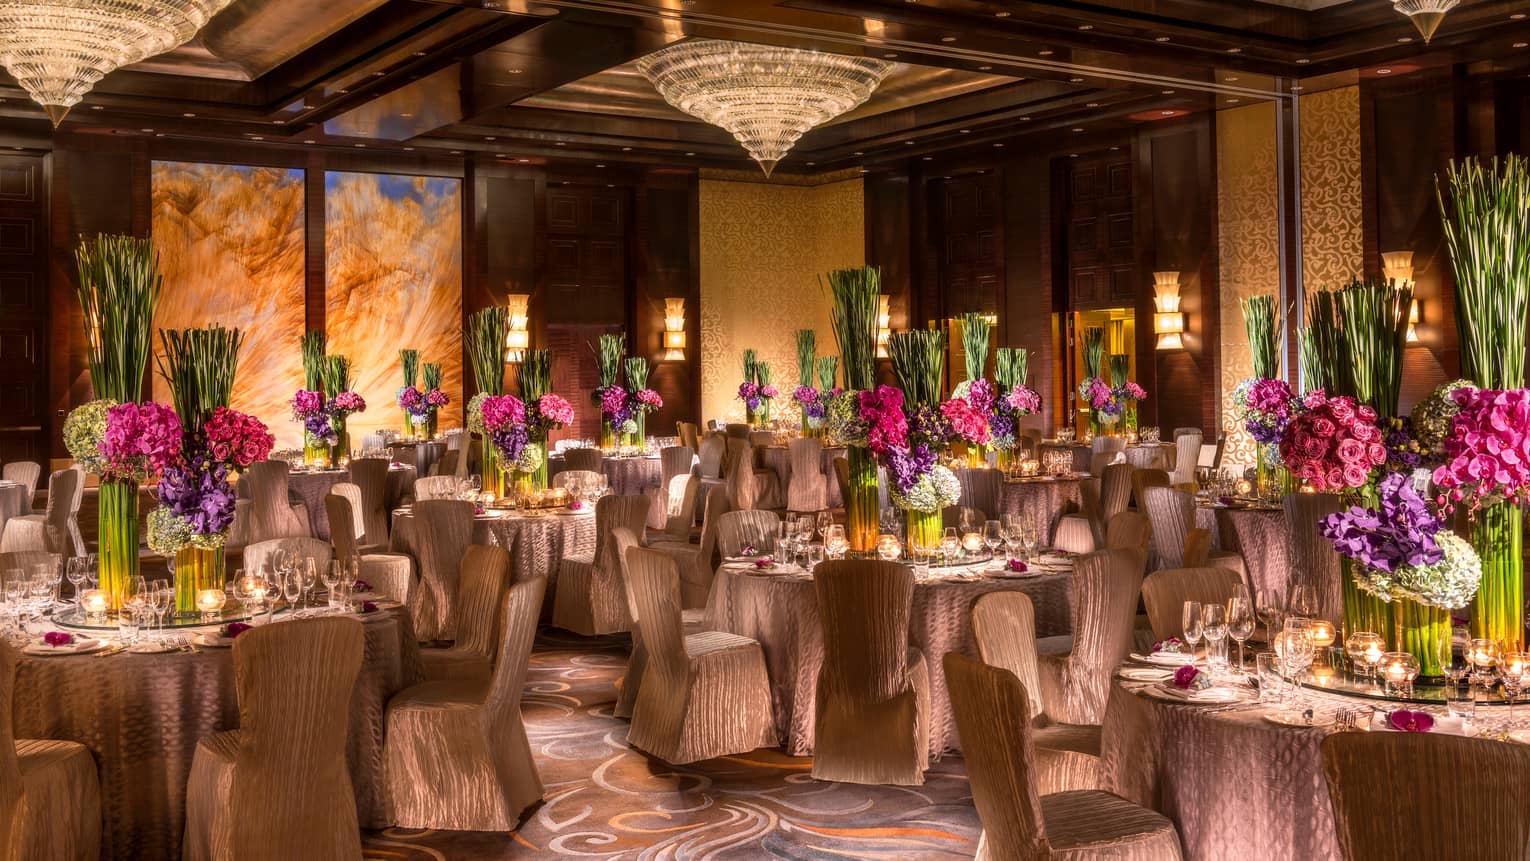 Imperial Ballroom wedding reception with fabric-covered chairs, floral centrepieces, crystal chandeliers